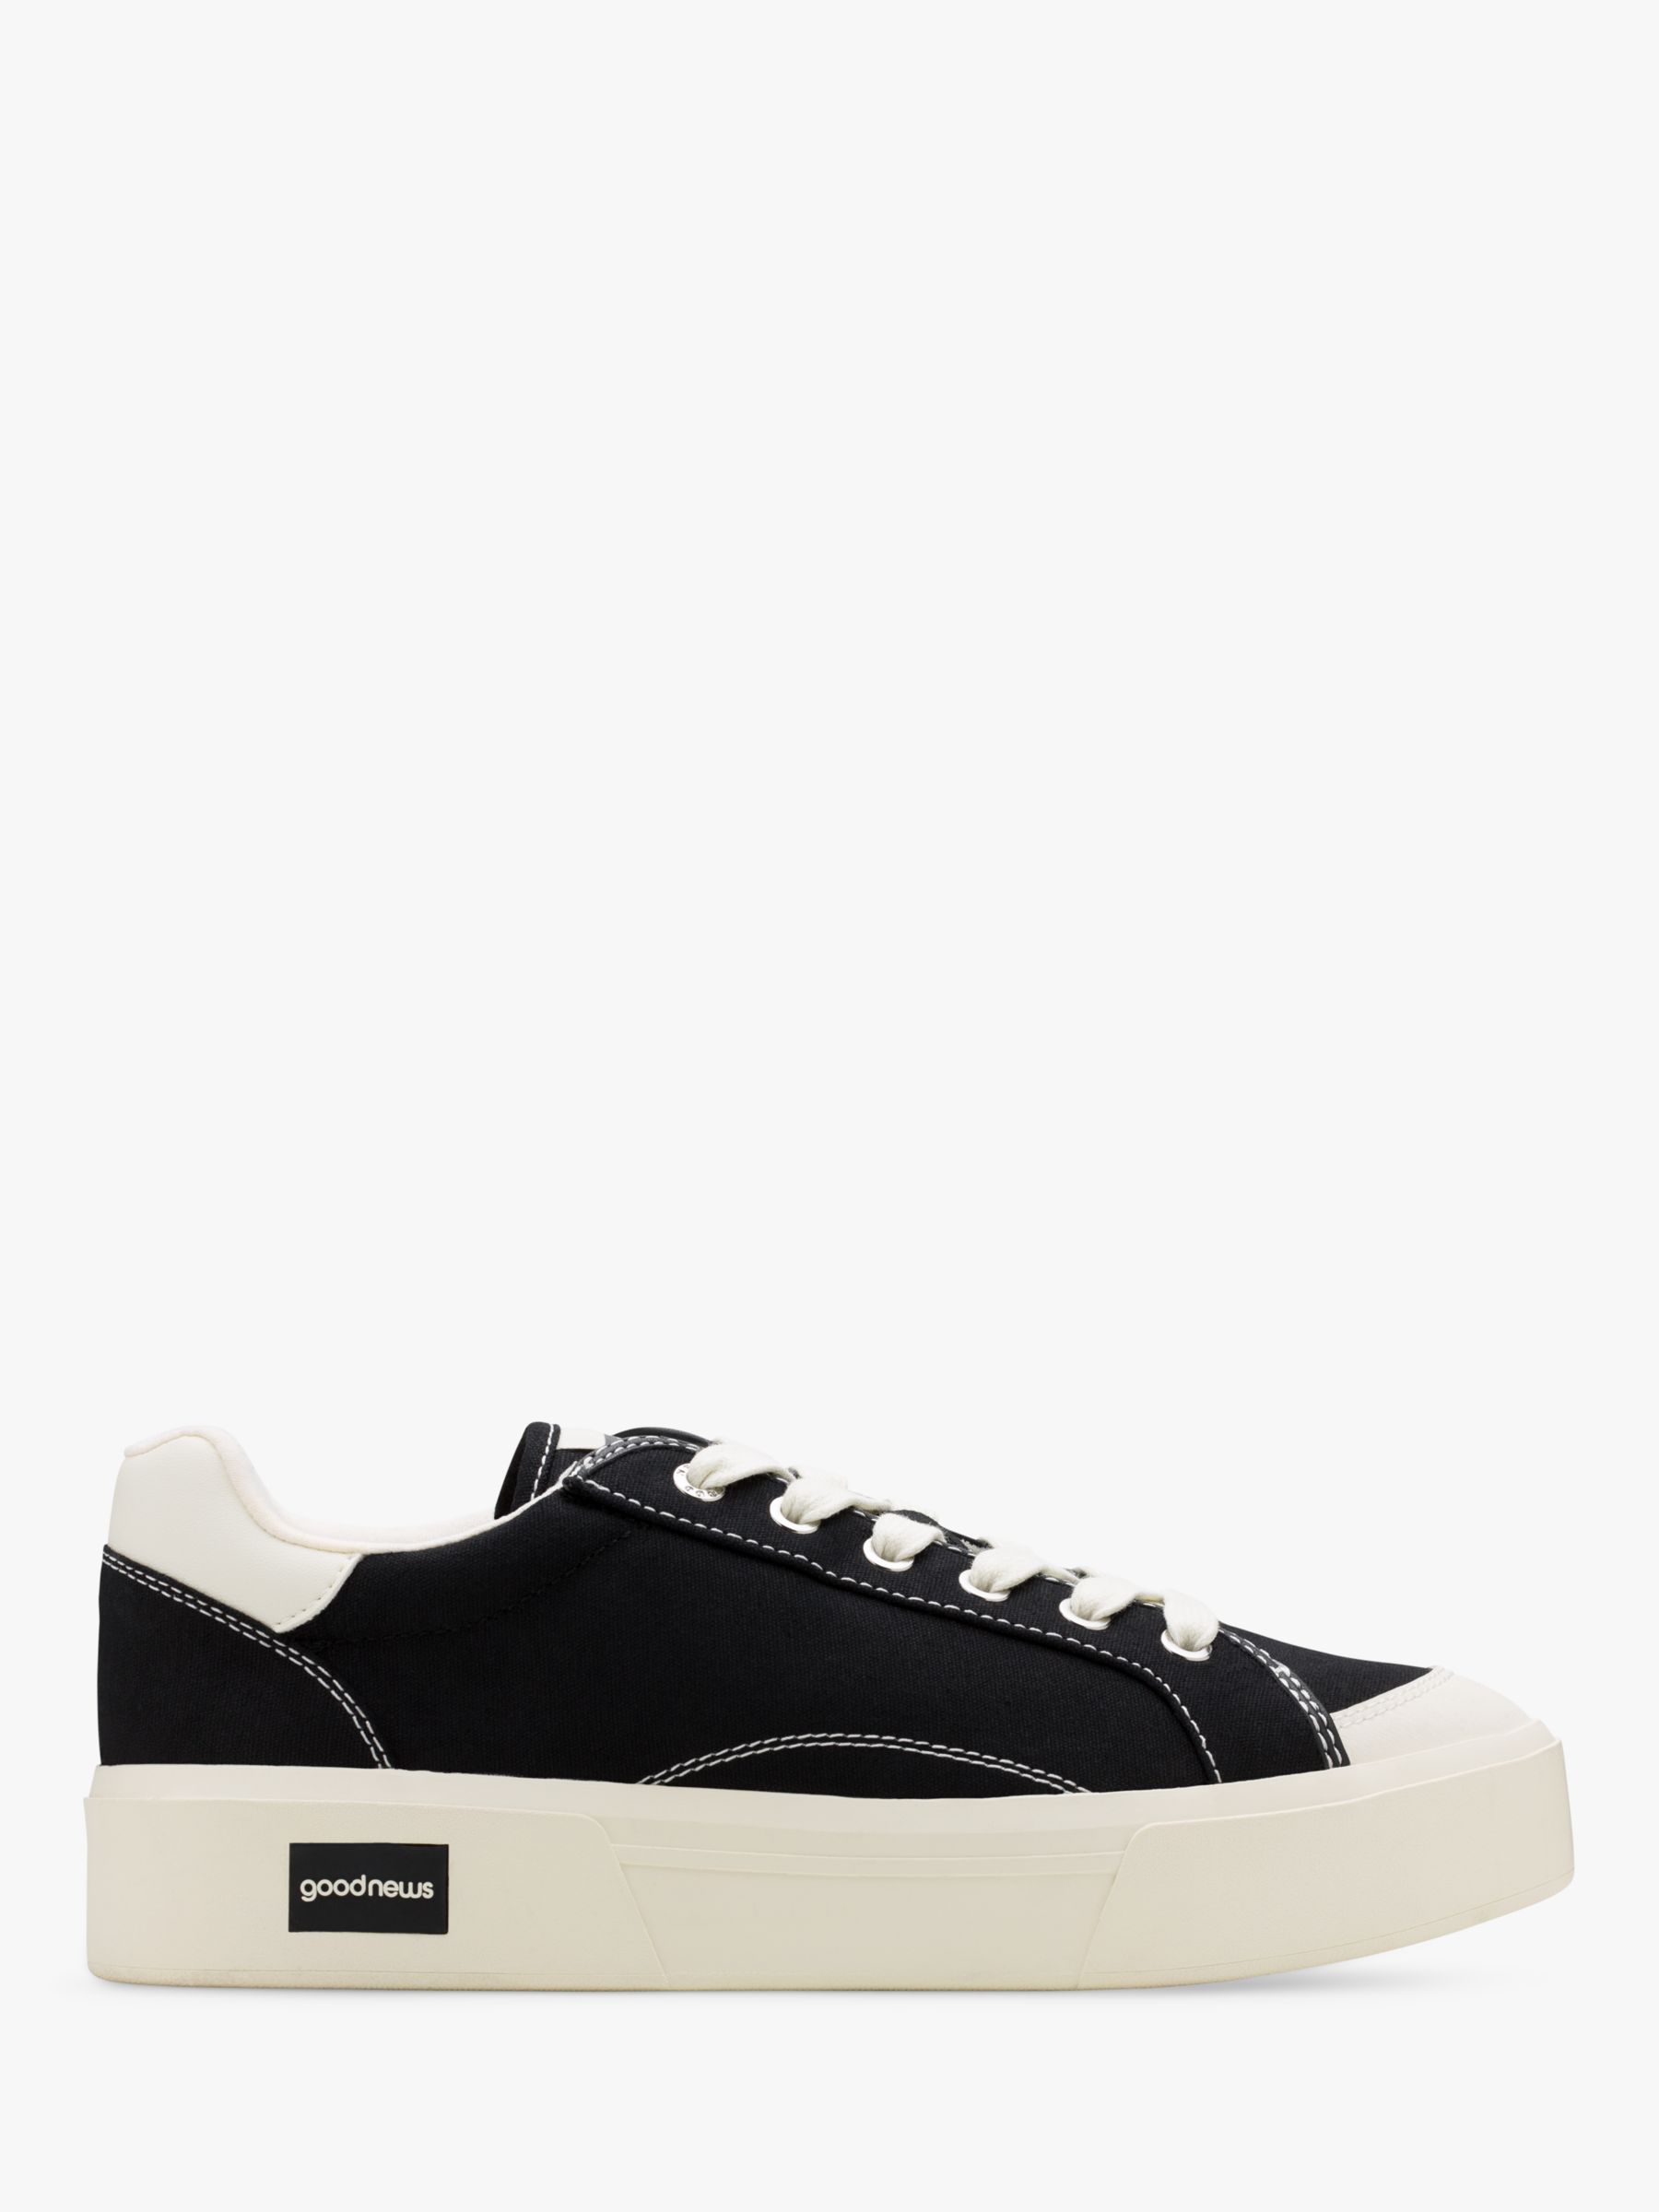 Good News Opal Lace Low-Top Trainers, Black, Black at John Lewis & Partners